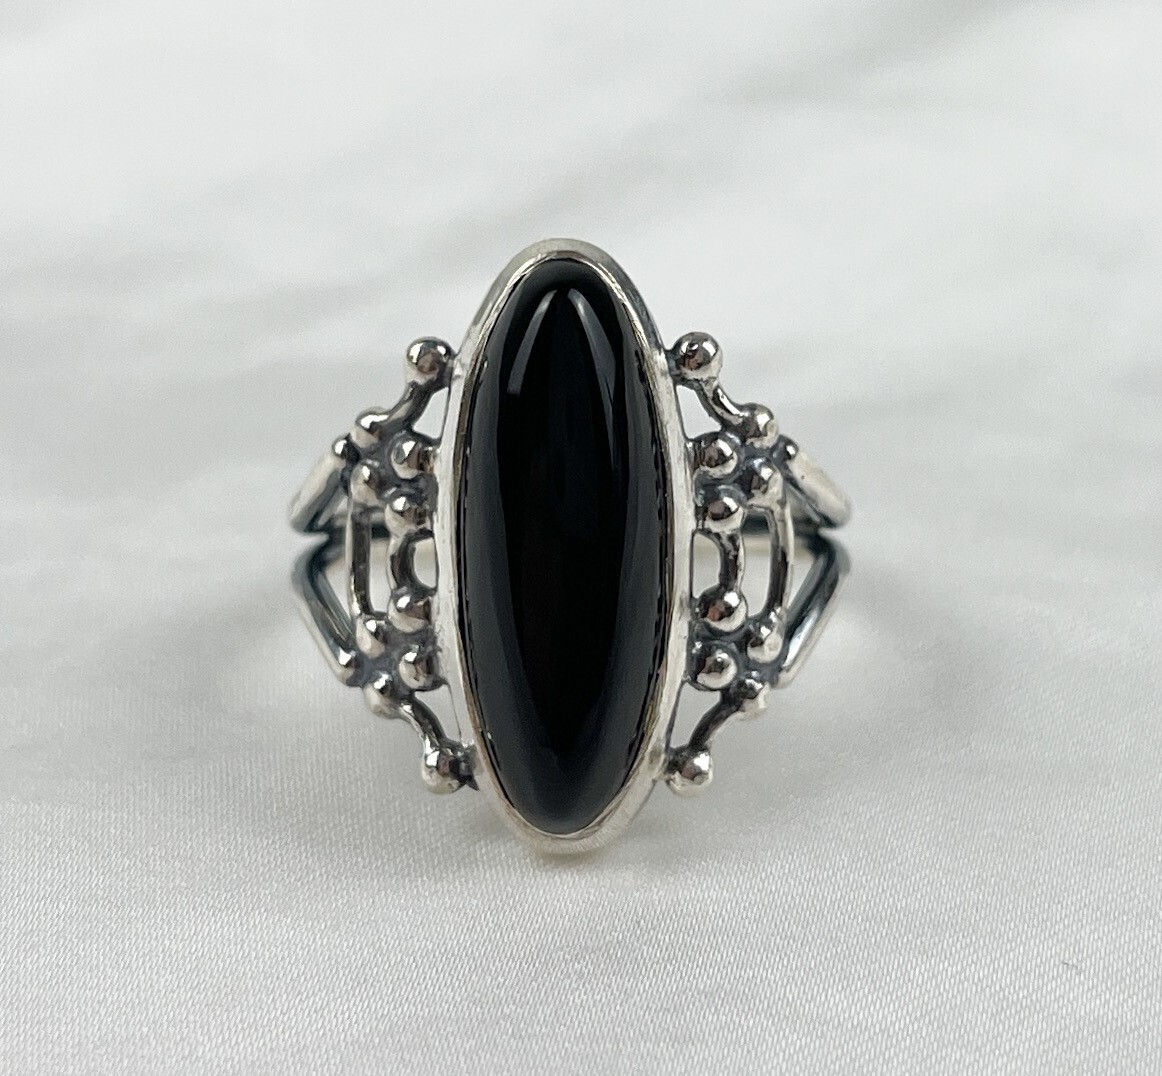 Large Oval Ring with Black Onyx Sterling Silver Size 8 3/4